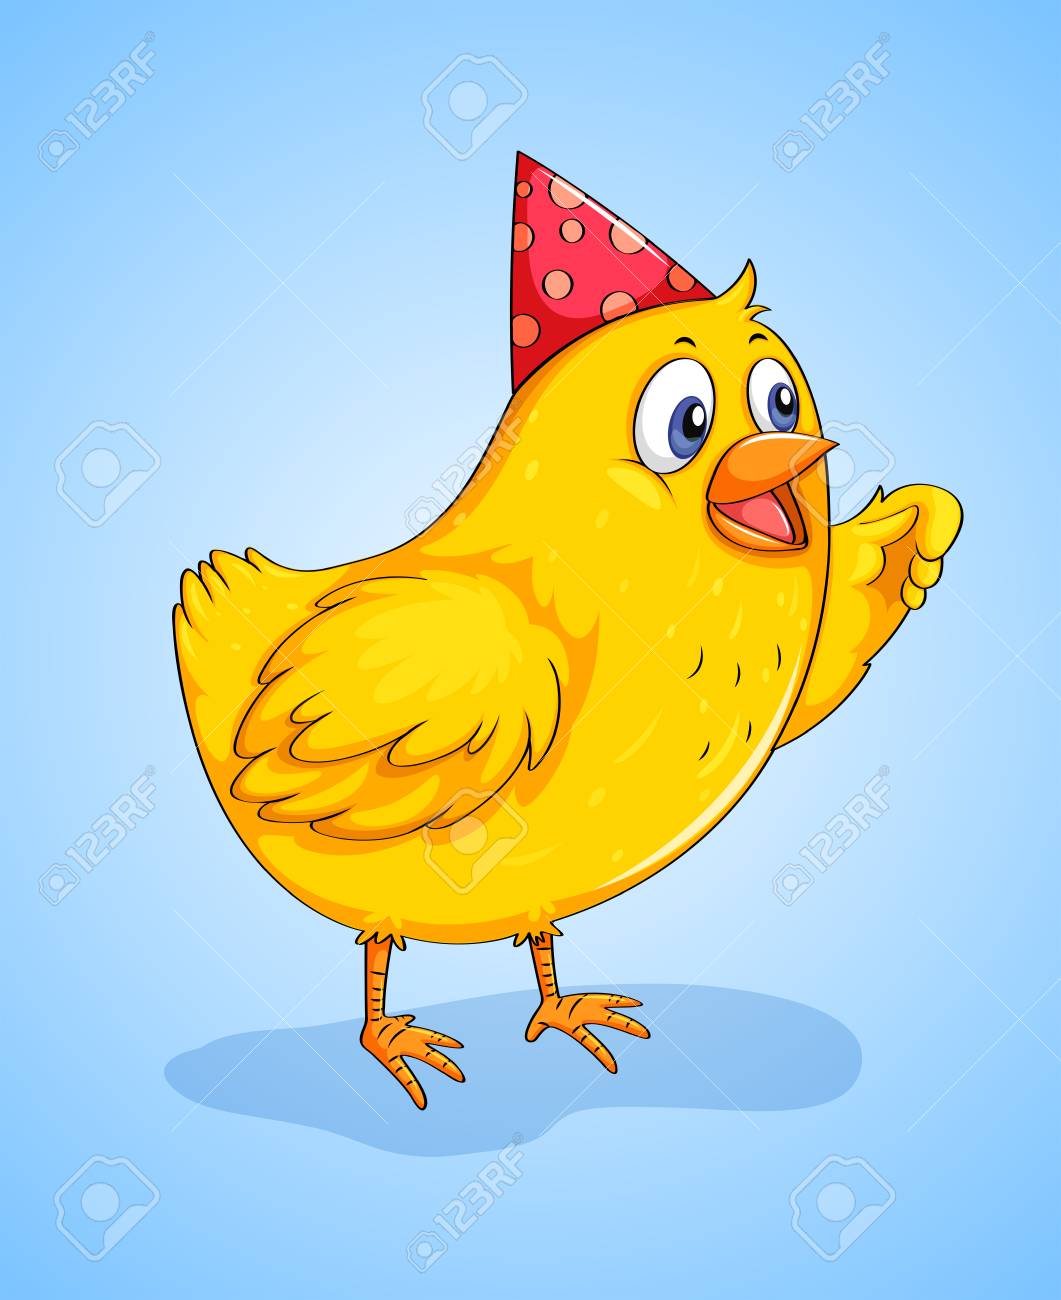 Clipart chicken party. X free clip art